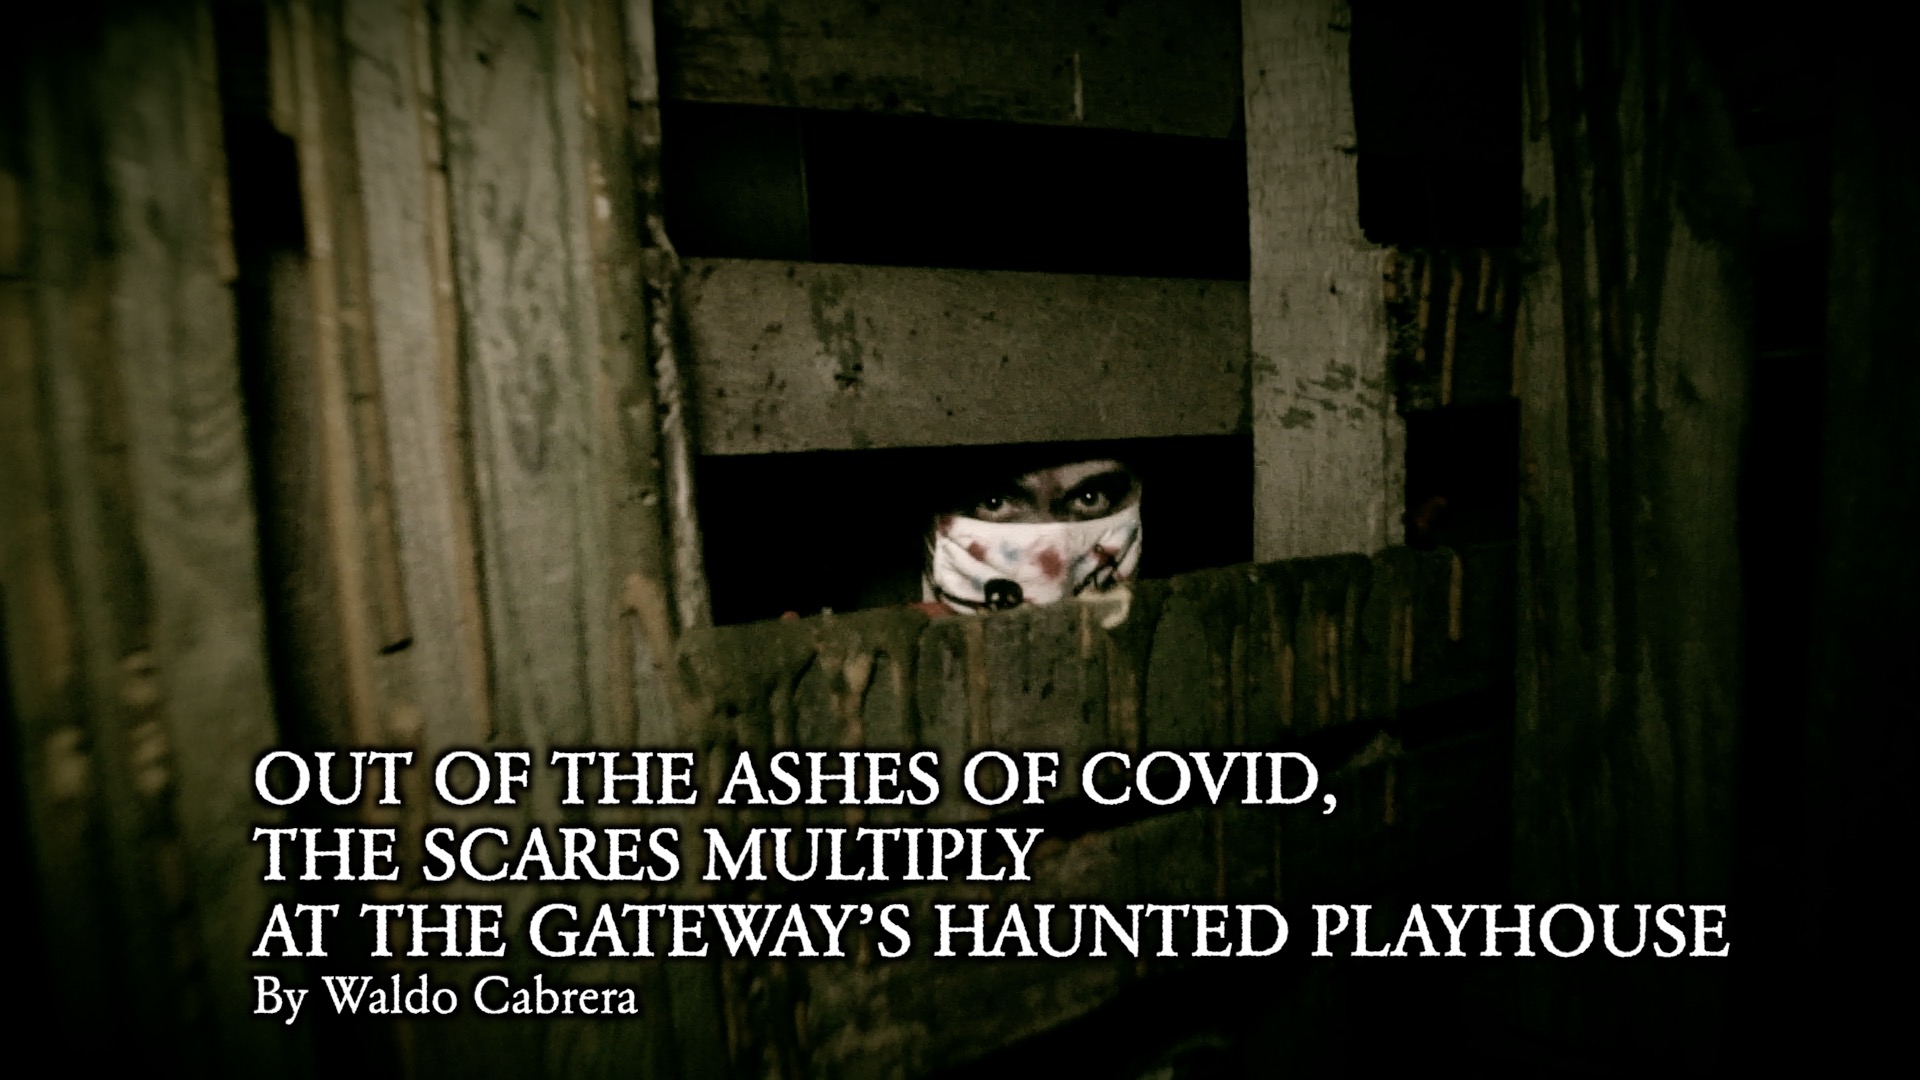 THE SCARES MULTIPLY AT THE GATEWAY’S HAUNTED PLAYHOUSE